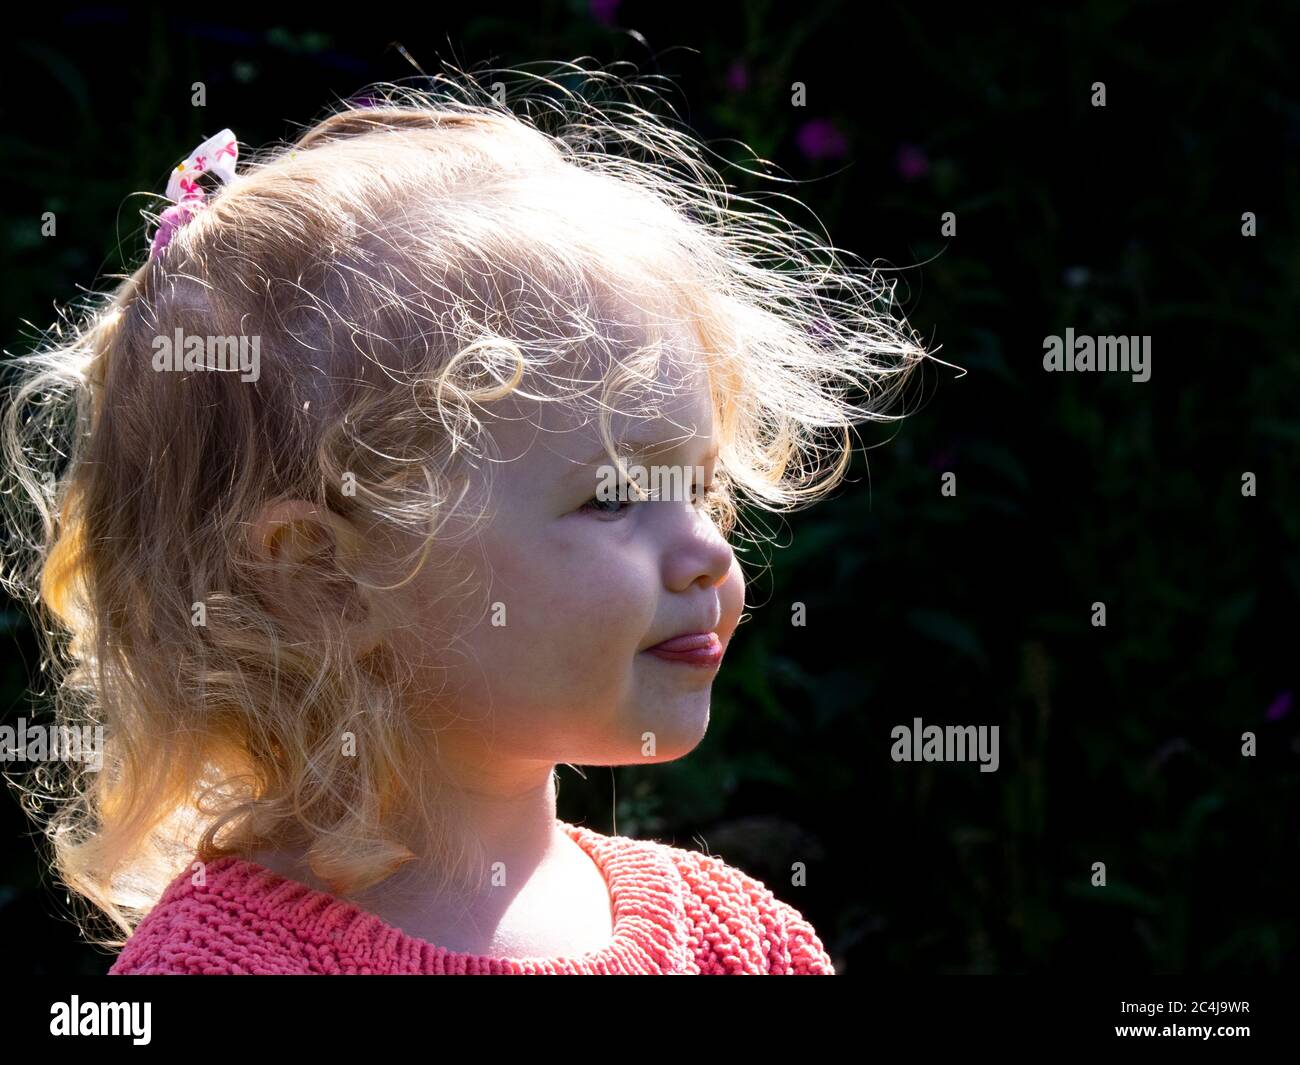 Profile portrait of a toddler, UK Stock Photo